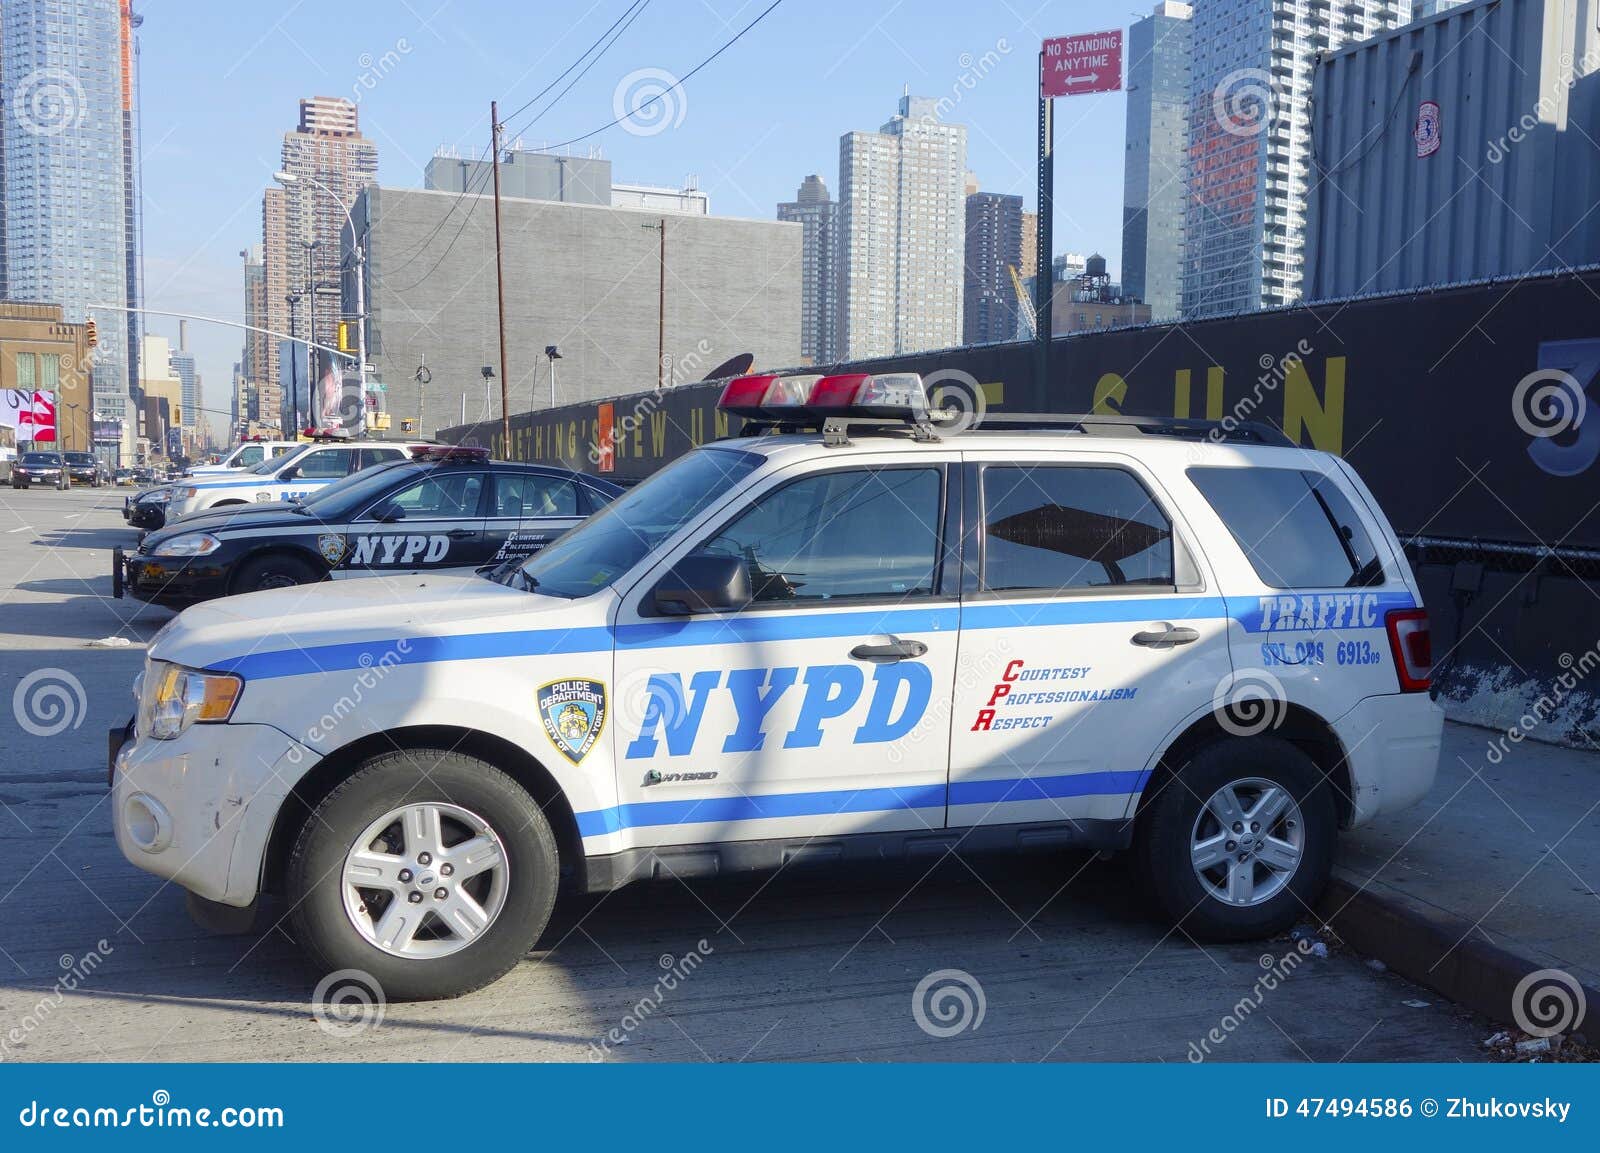 NYPD Traffic Control Vehicle In Manhattan Editorial Photo - Image: 474945861300 x 953